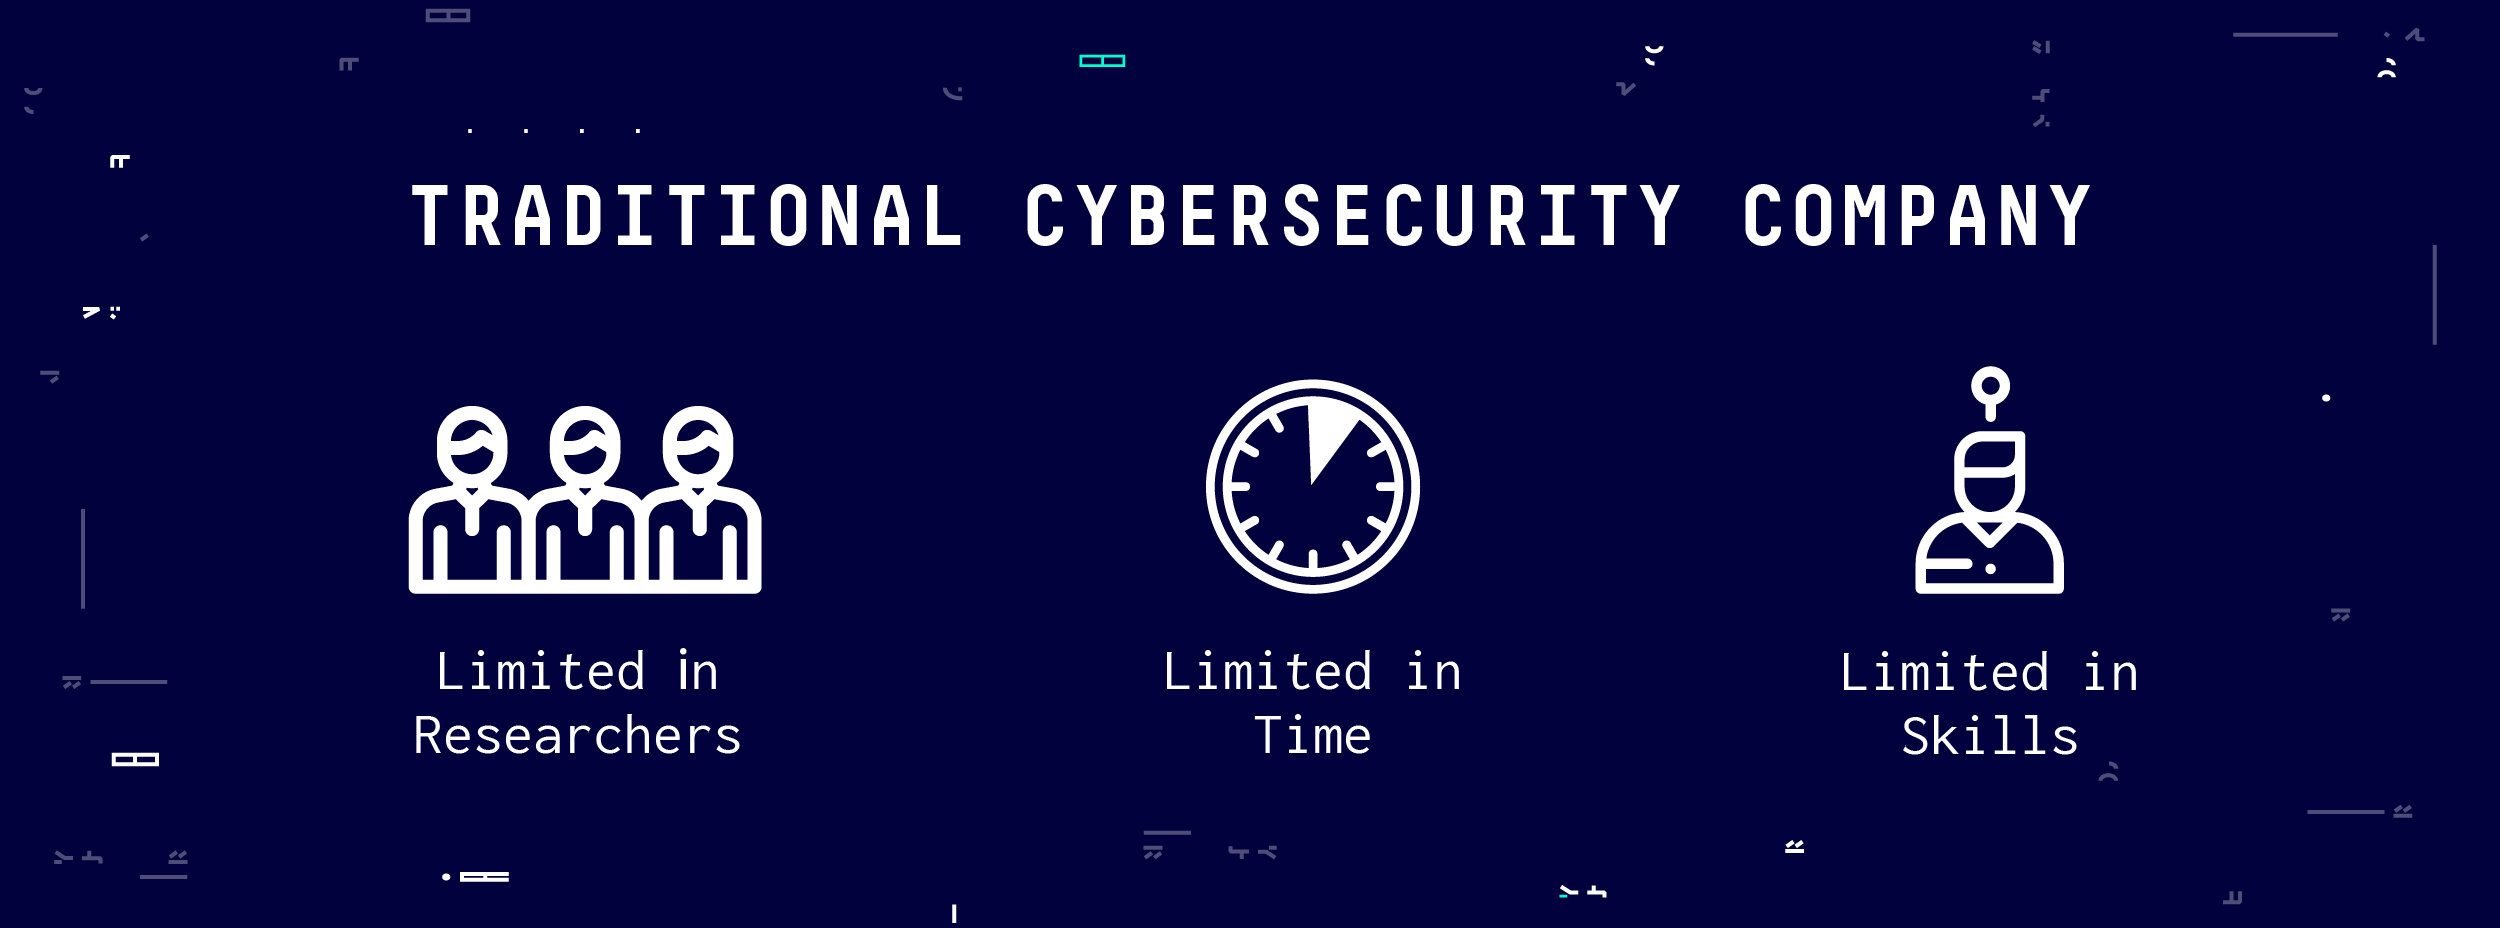 Traditional Cybersecurity Company